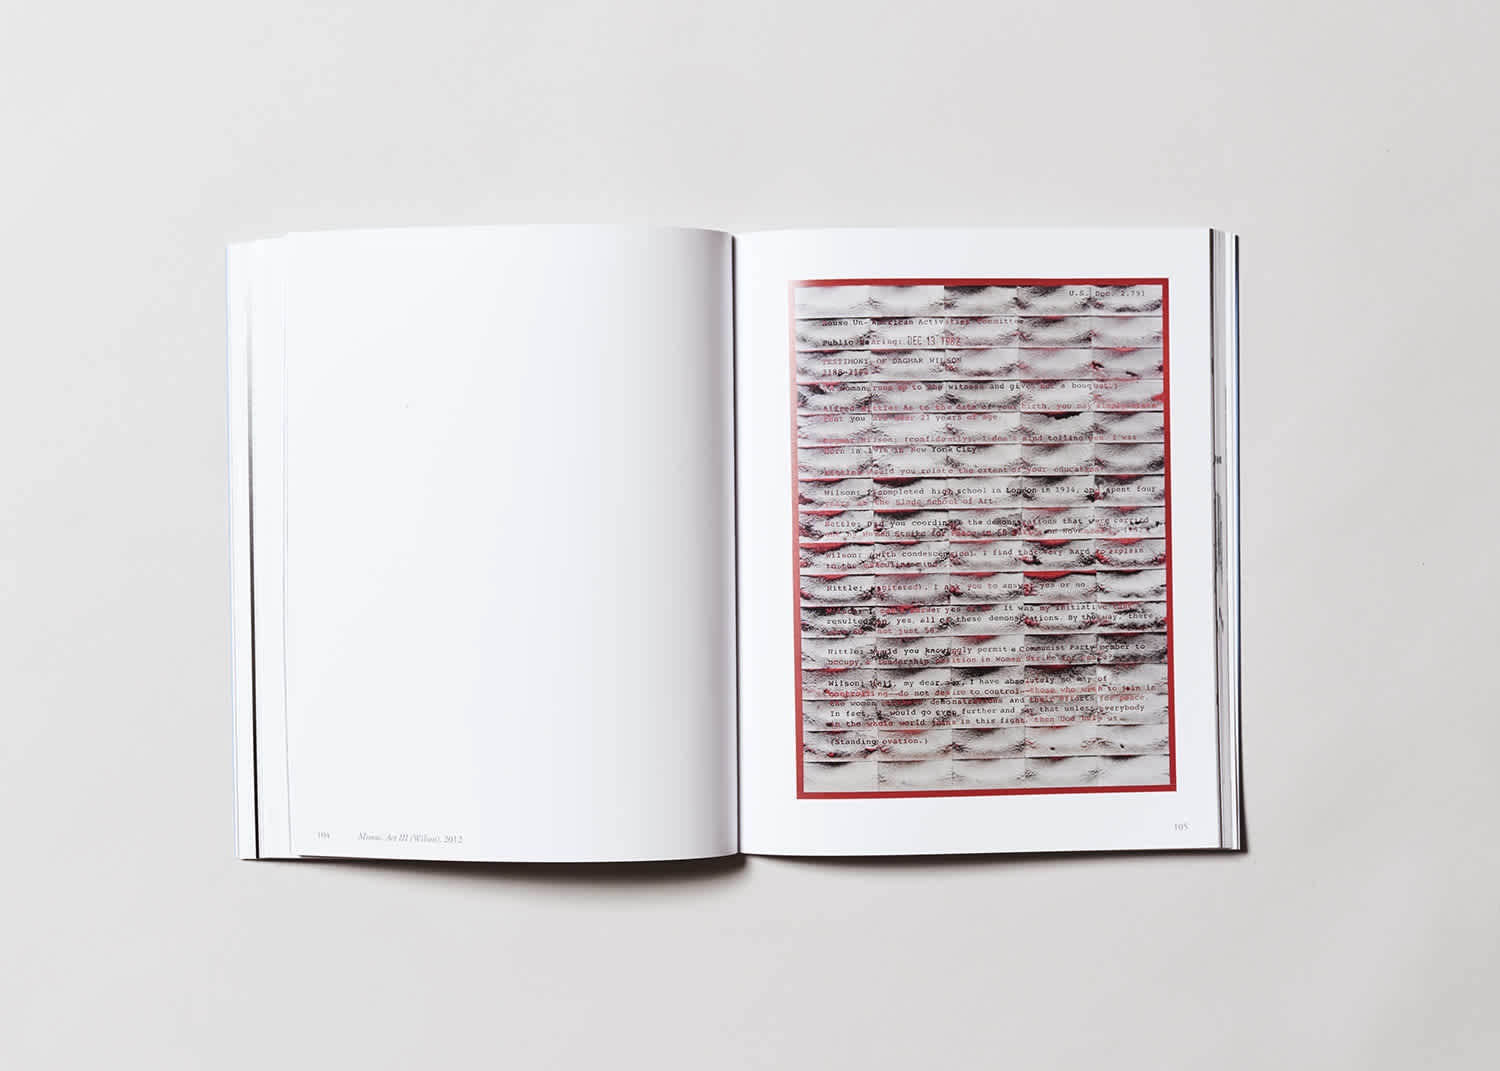 Book interior. The left page is blank, the right page has a black and red artwork by the artist Mary Kelly.